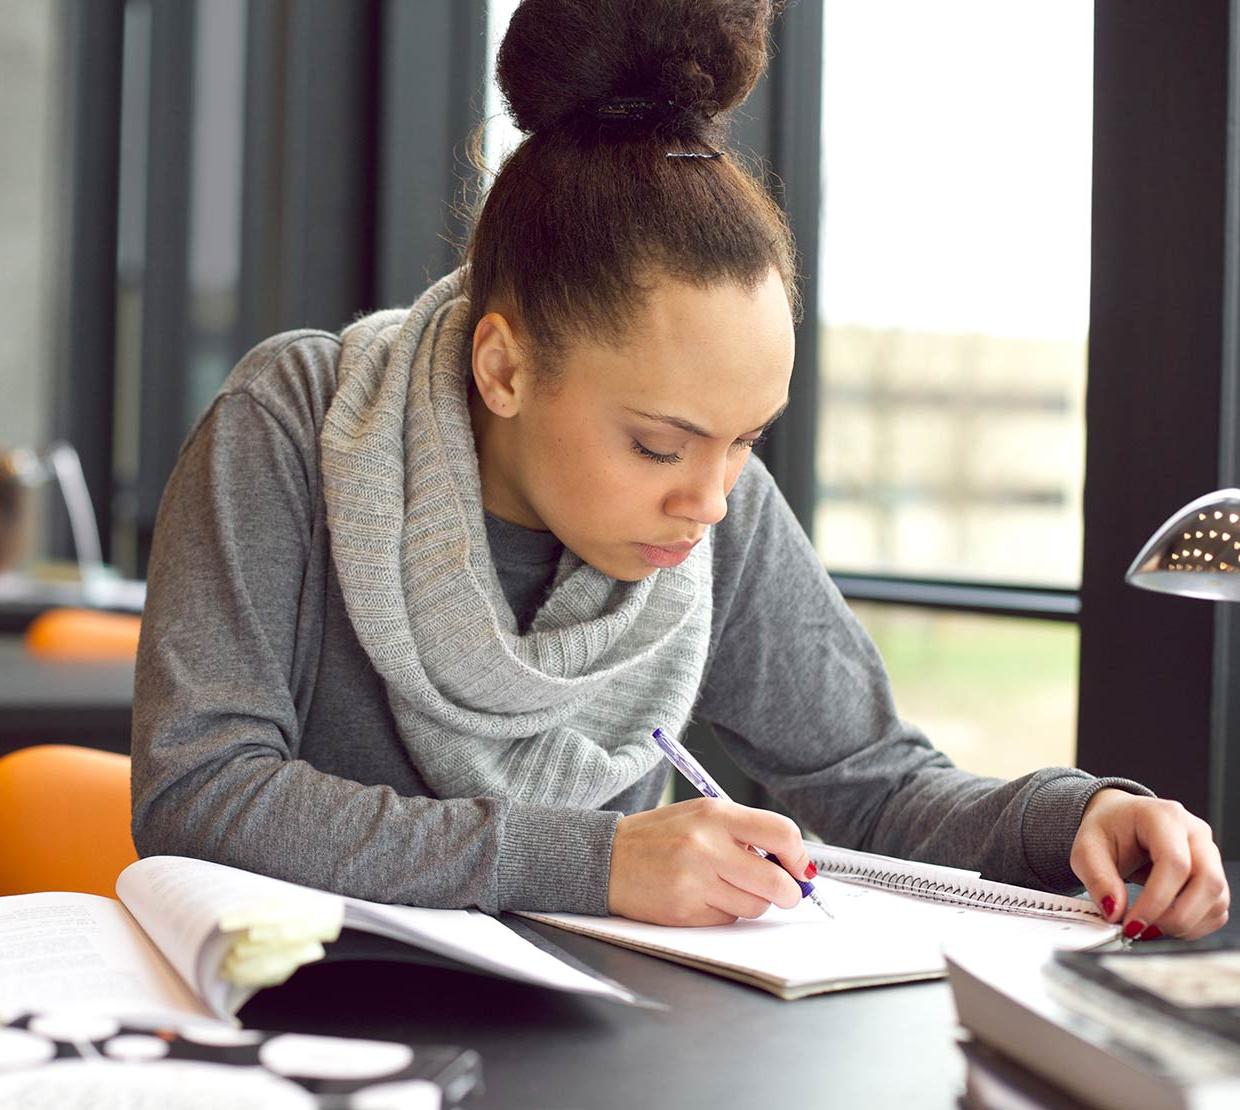 Woman working on homework at table